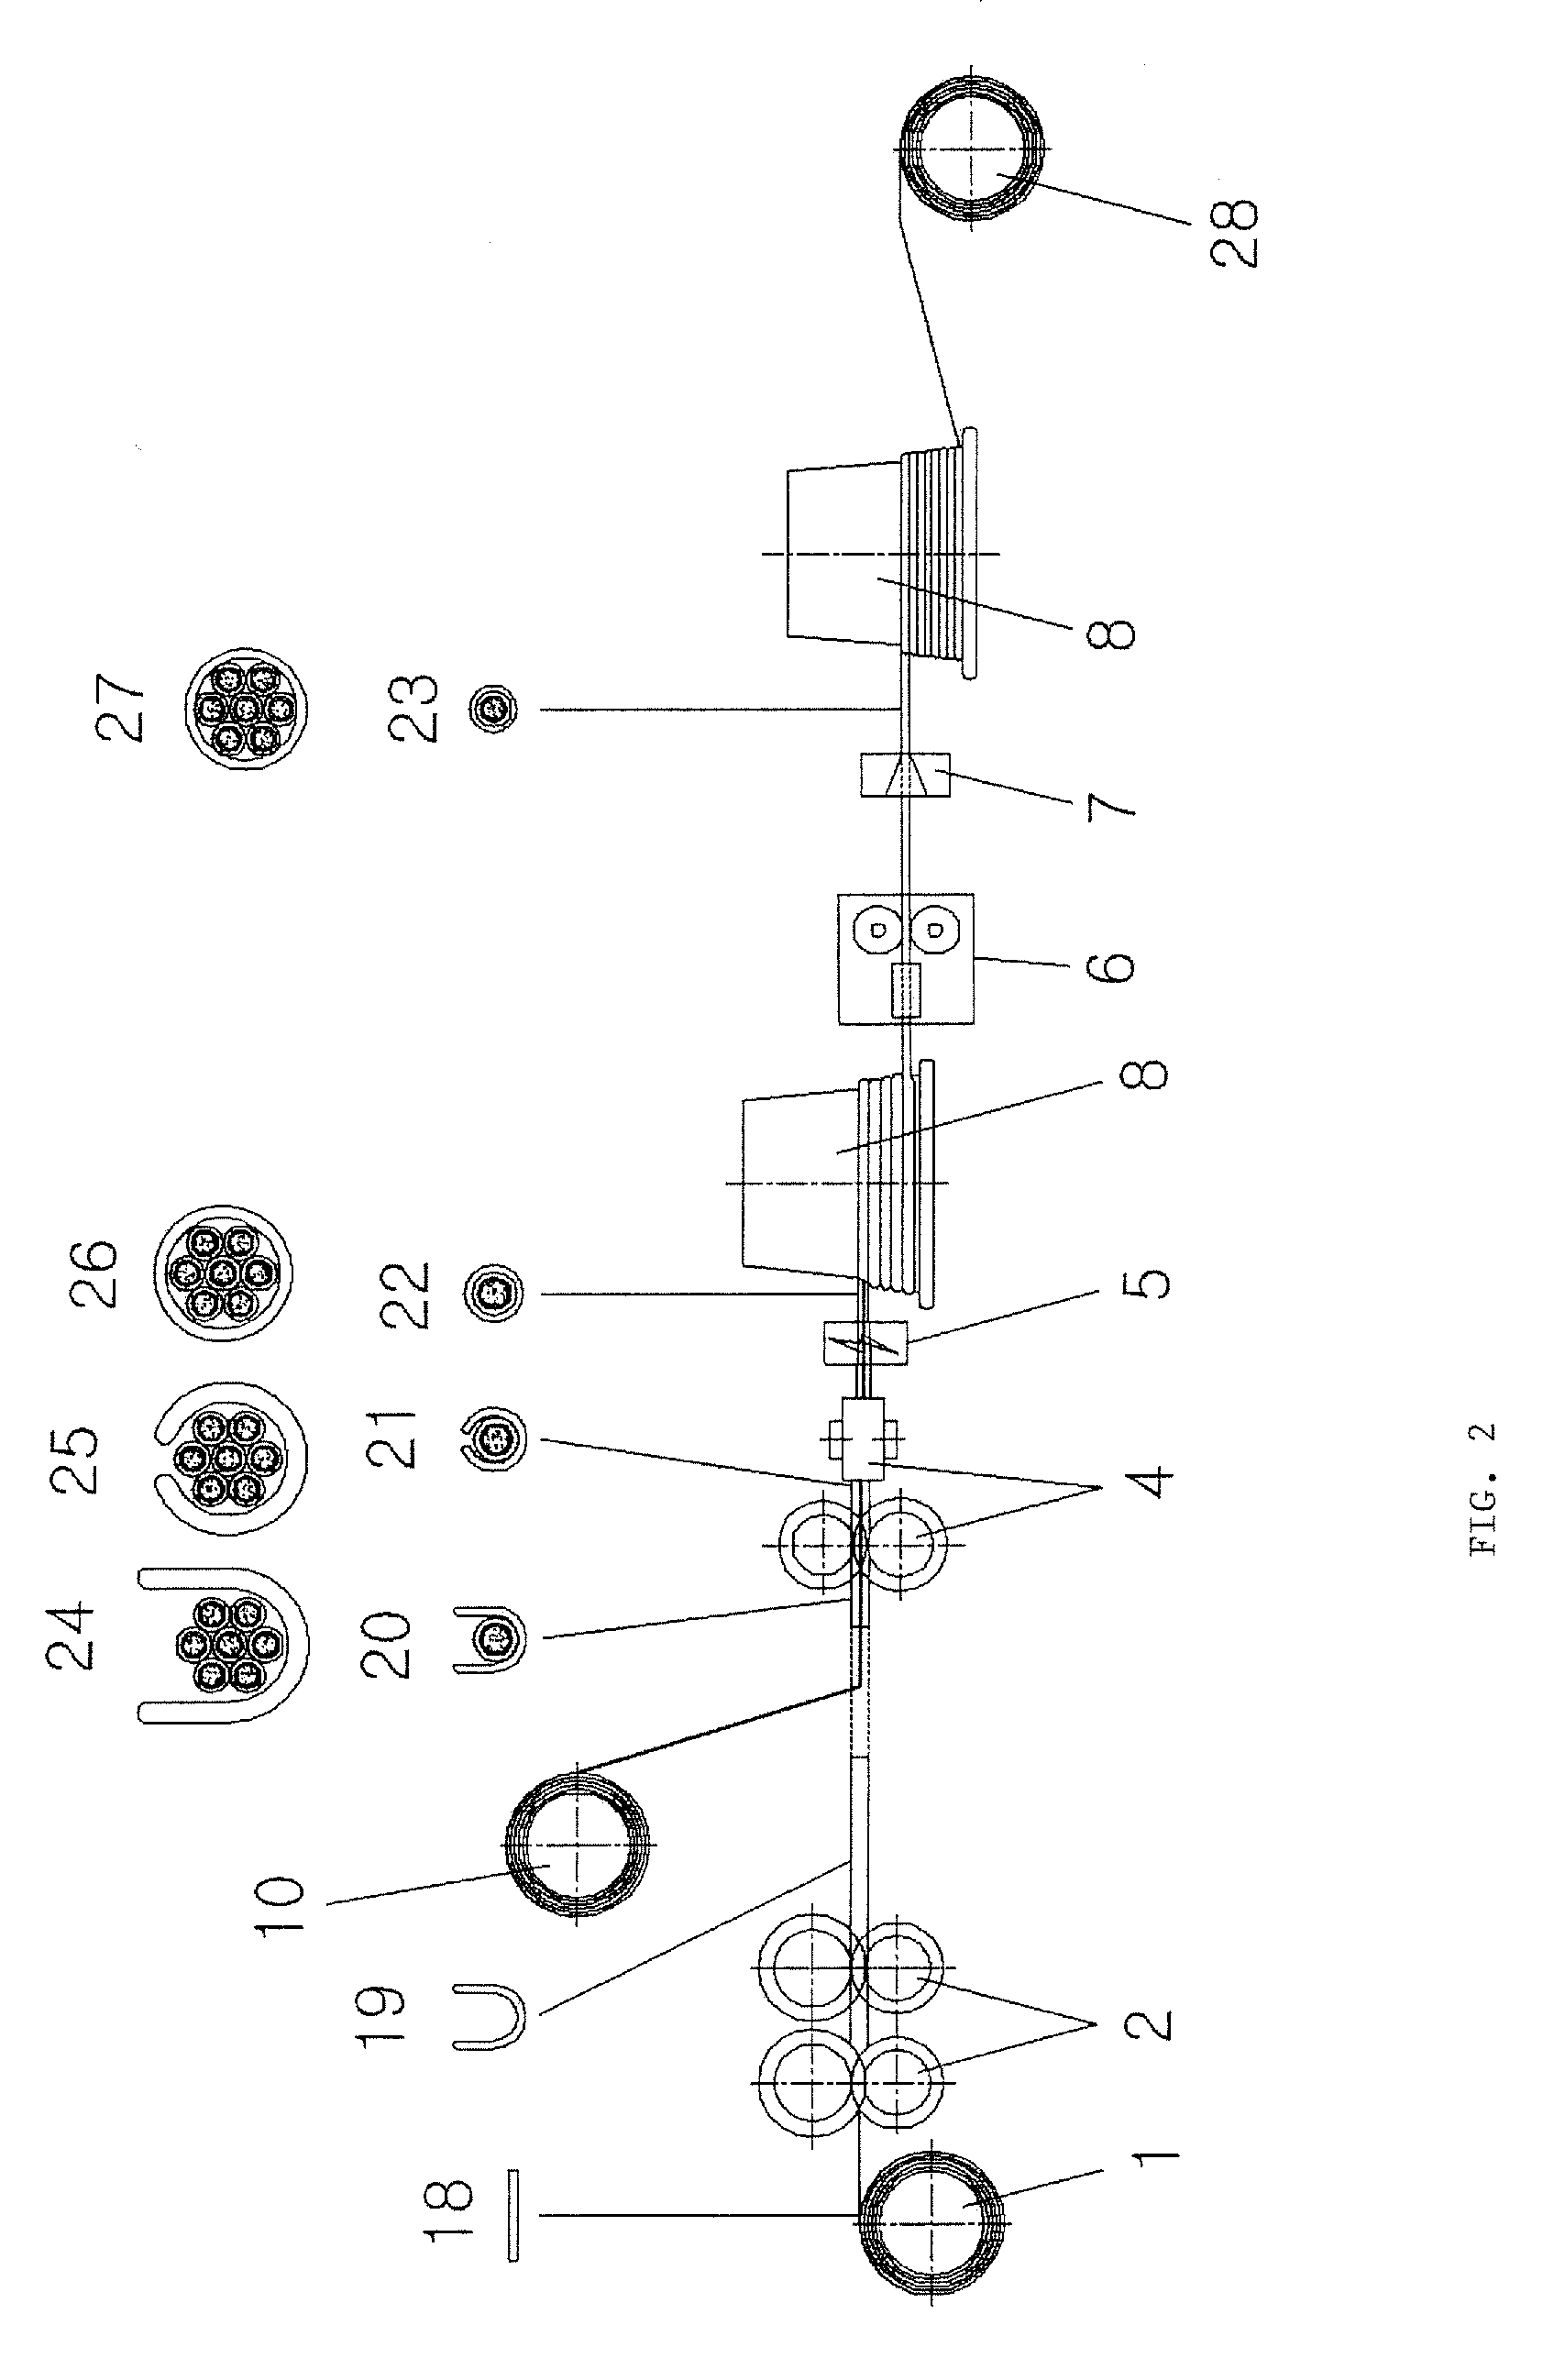 Method of Manufacturing MgB2 Superconducting Wire